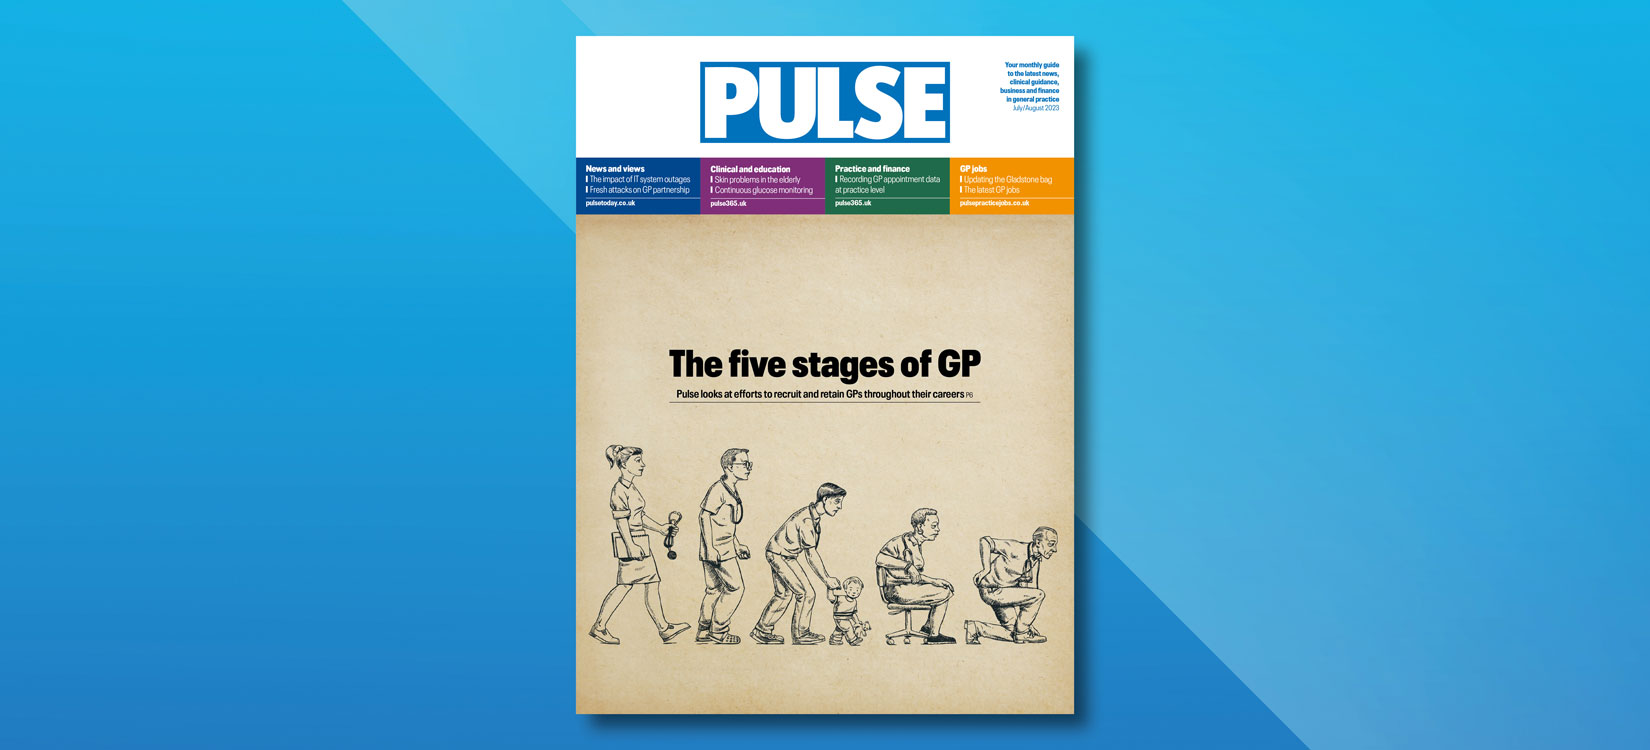 Pulse: The five stages of GP